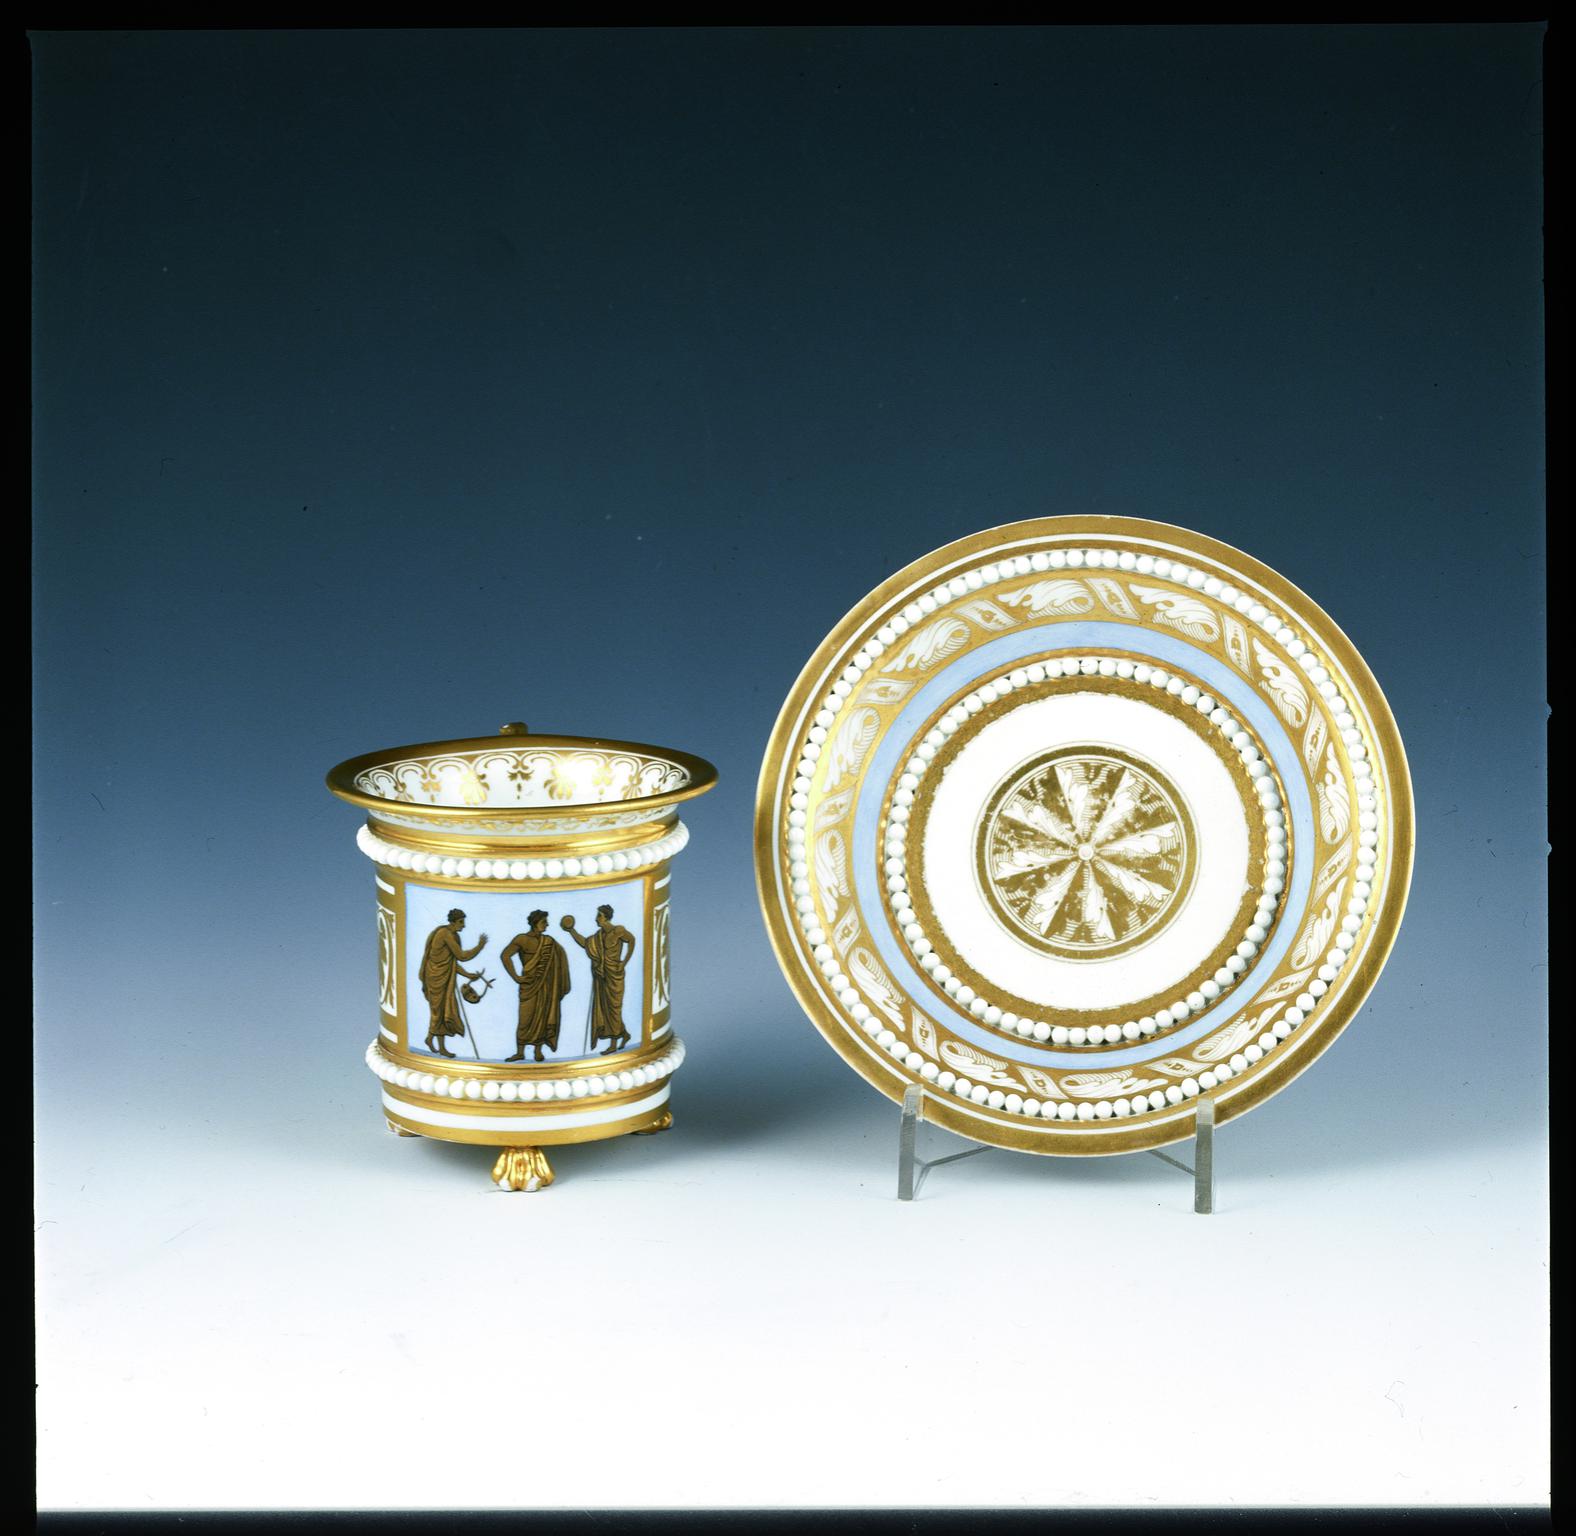 Cup, cabinet and saucer